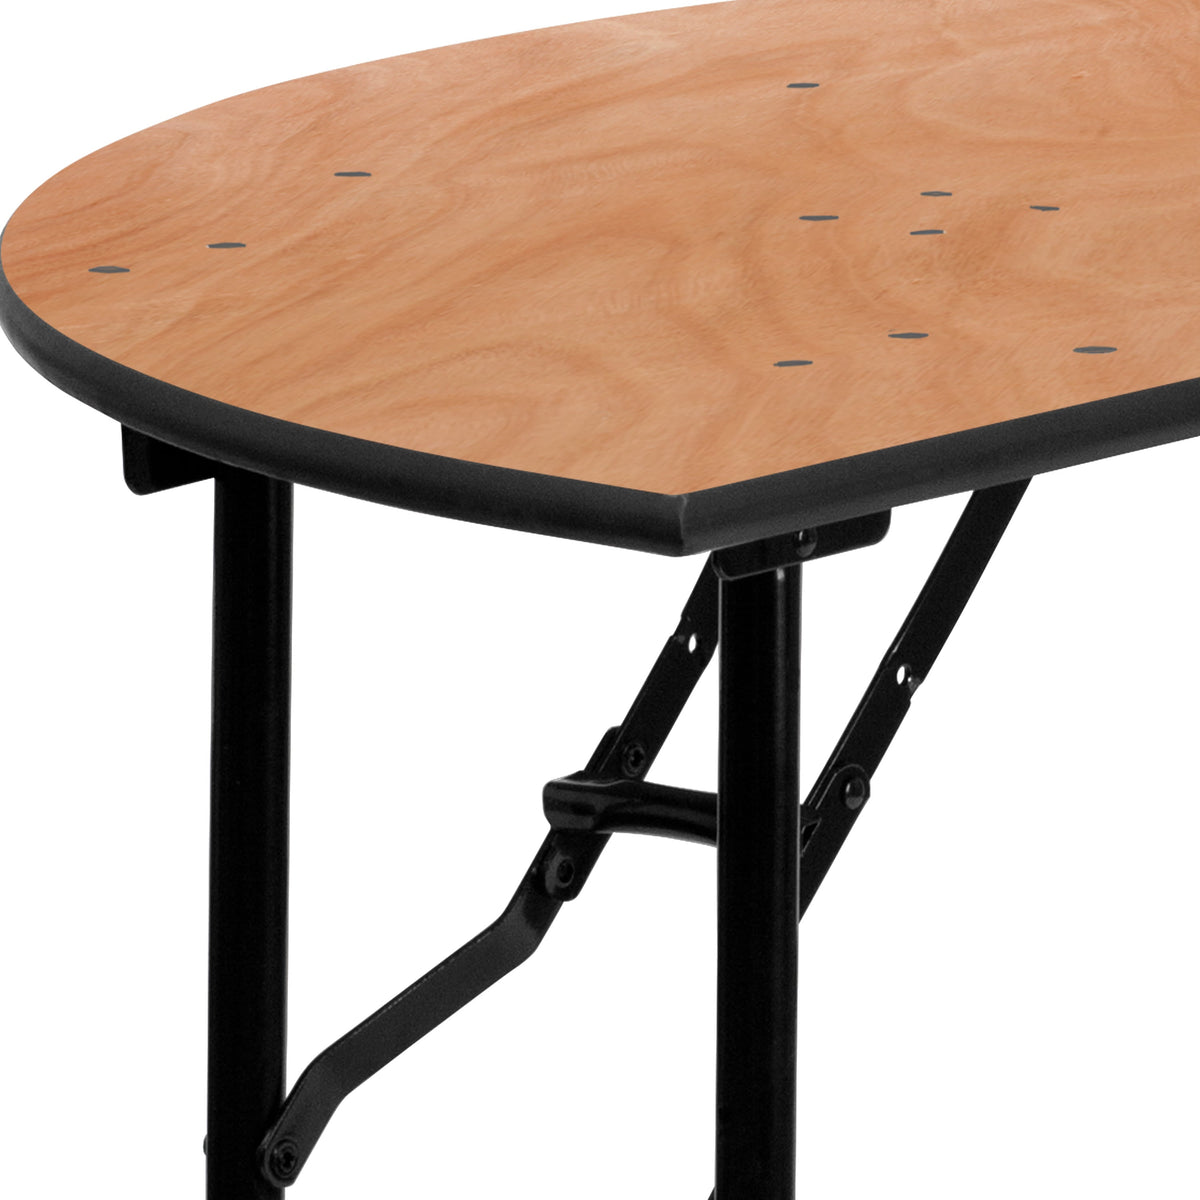 4-Foot Half-Round Wood Folding Banquet Table - Event & Catering Table